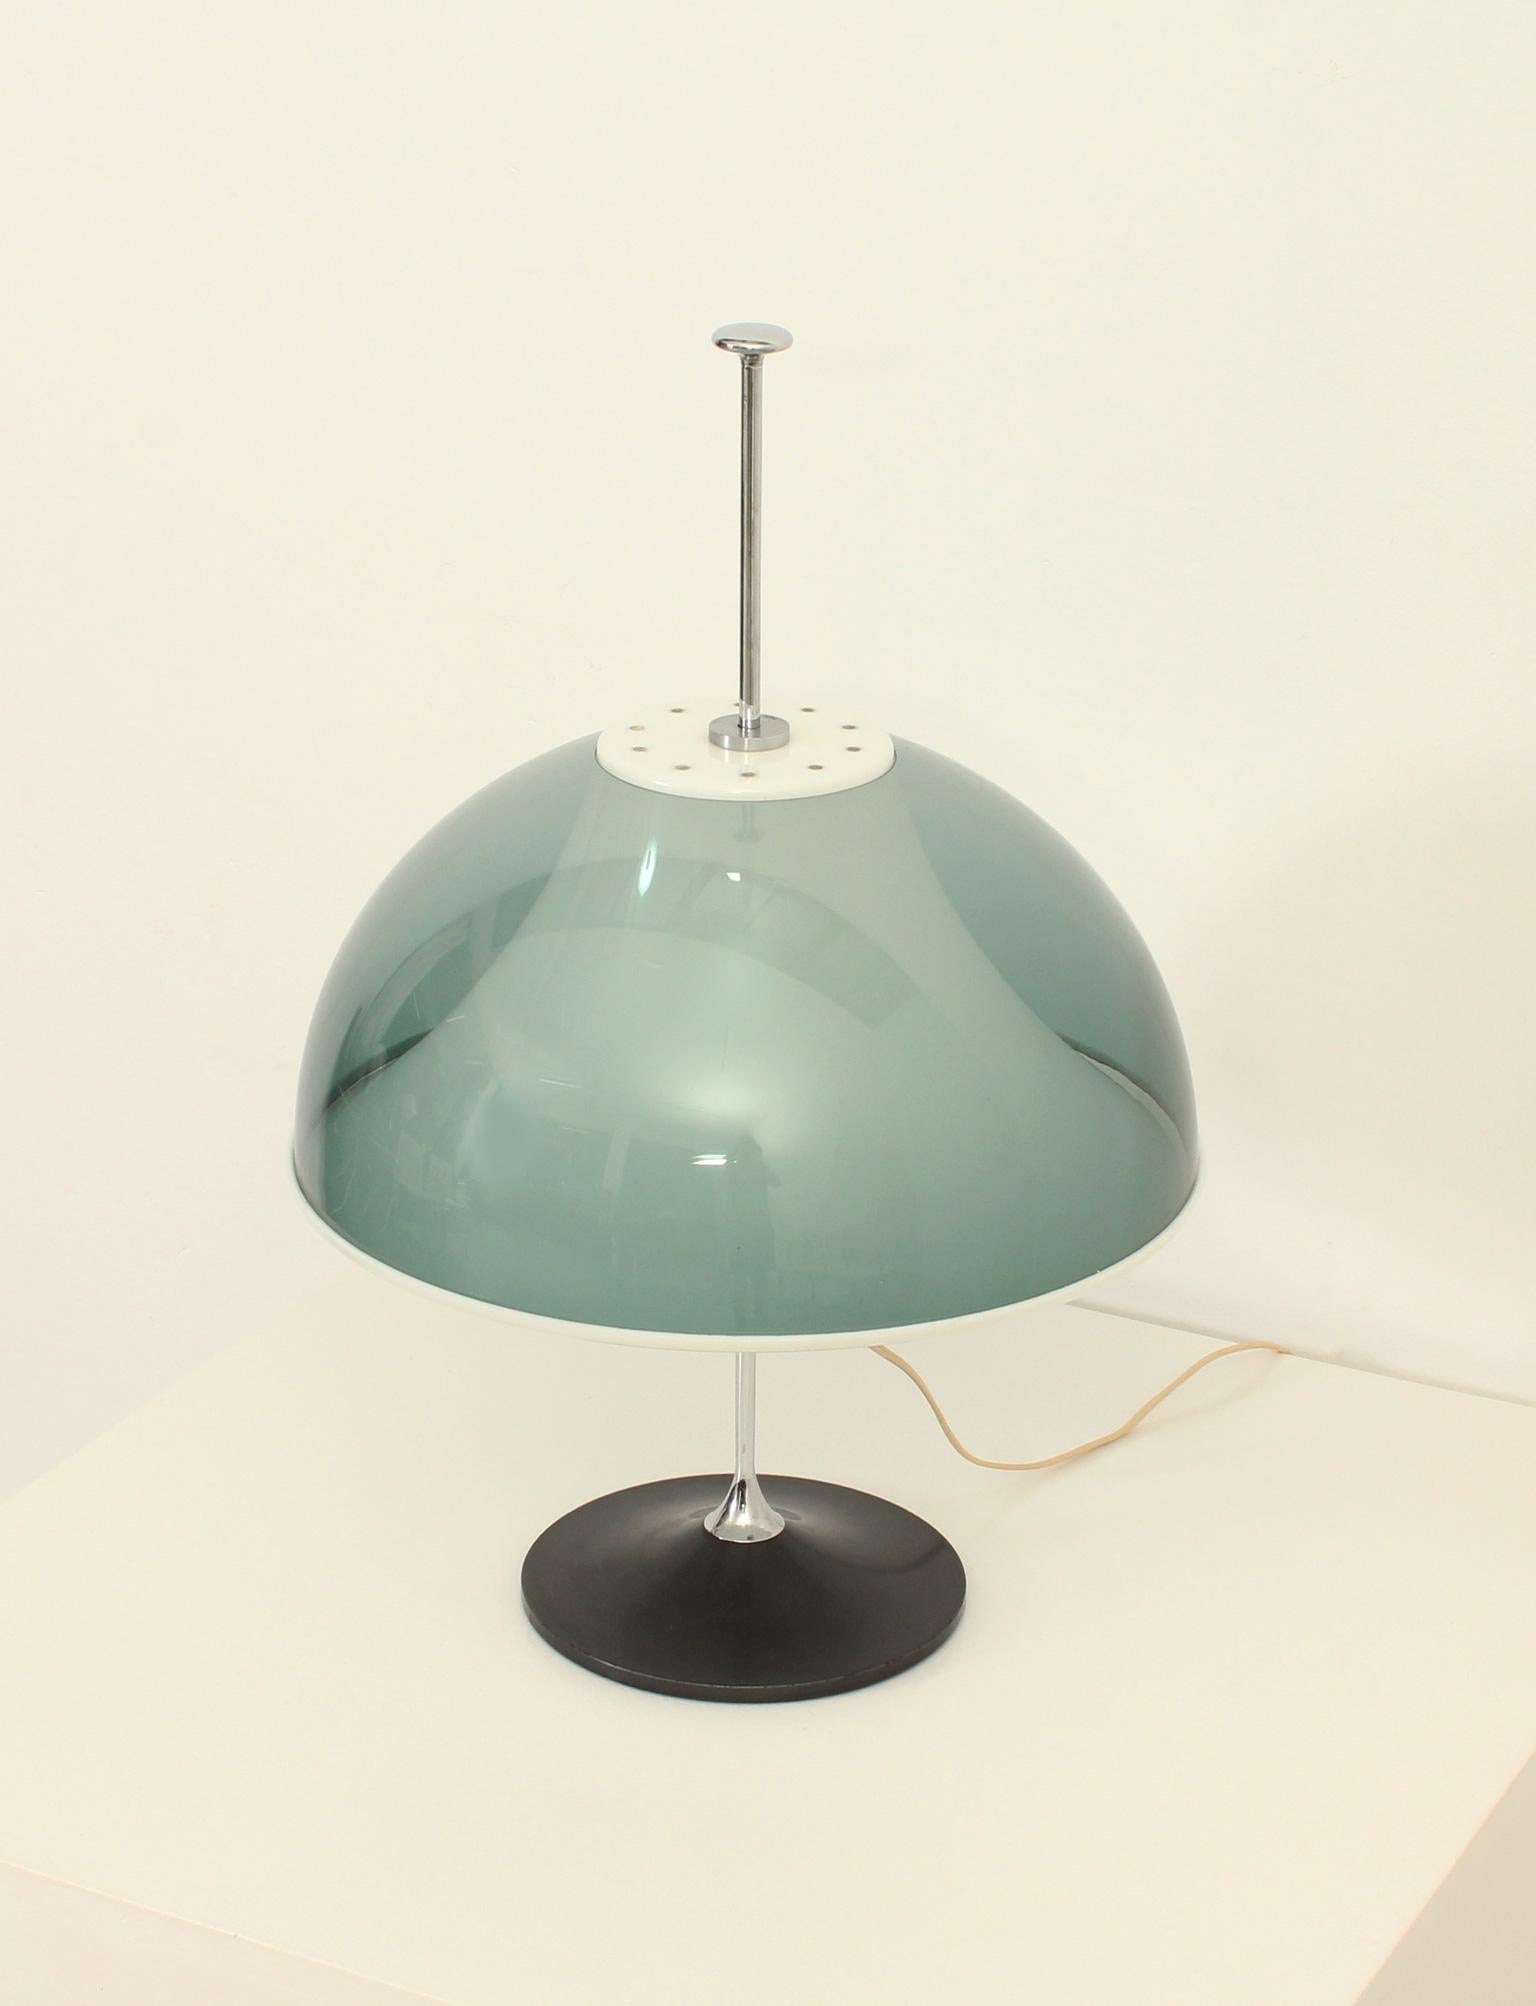 Adjustable table lamp designed in 1962 by Elio Martinelli for Metalarte, Spain. Double shade with colored plexiglass and white acrylic, base in lacquered metal and chromed steel with three bulbs. The height of the shade can be easily adjusted.